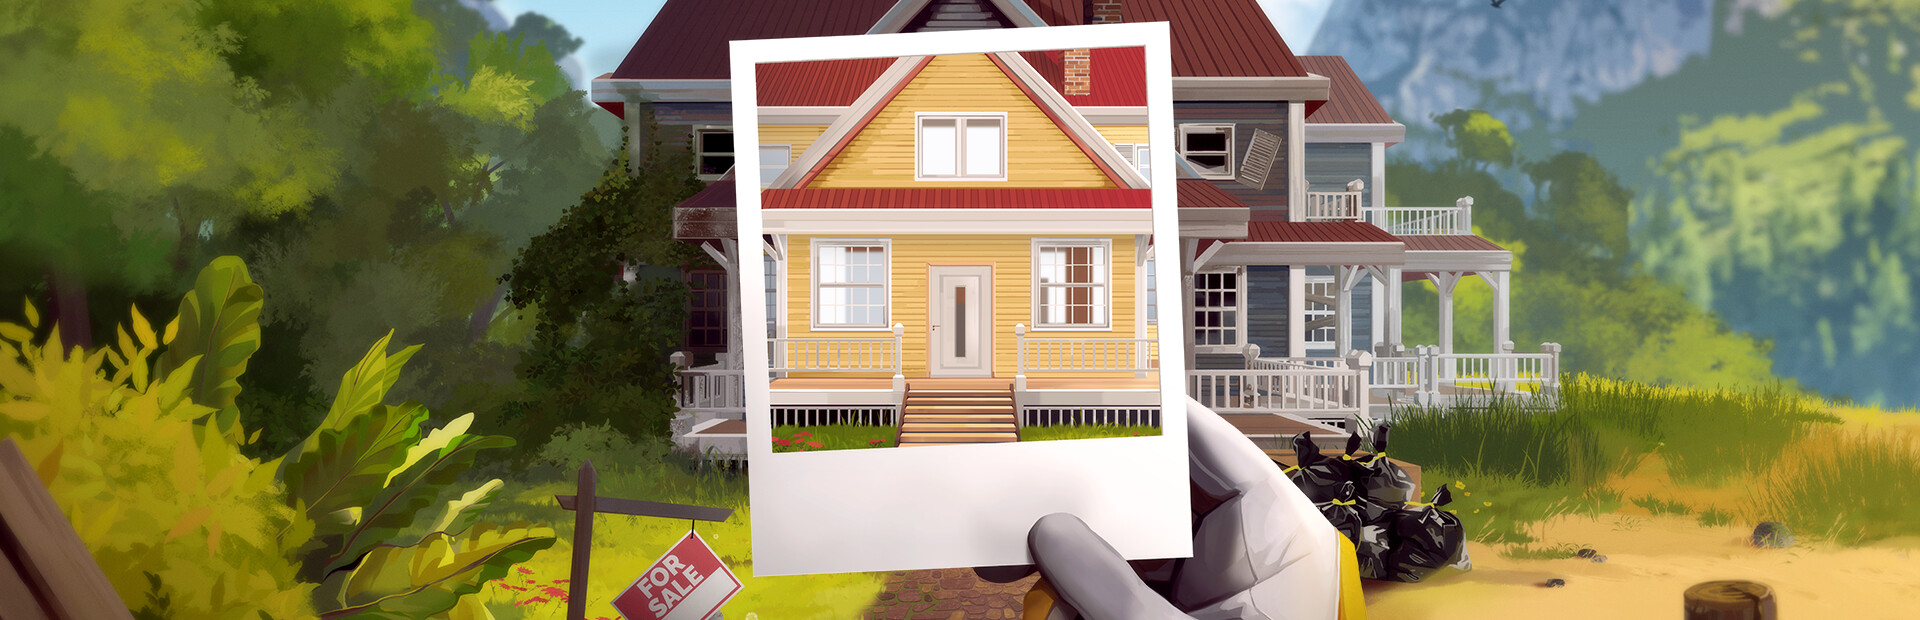 House Flipper 2 cover image